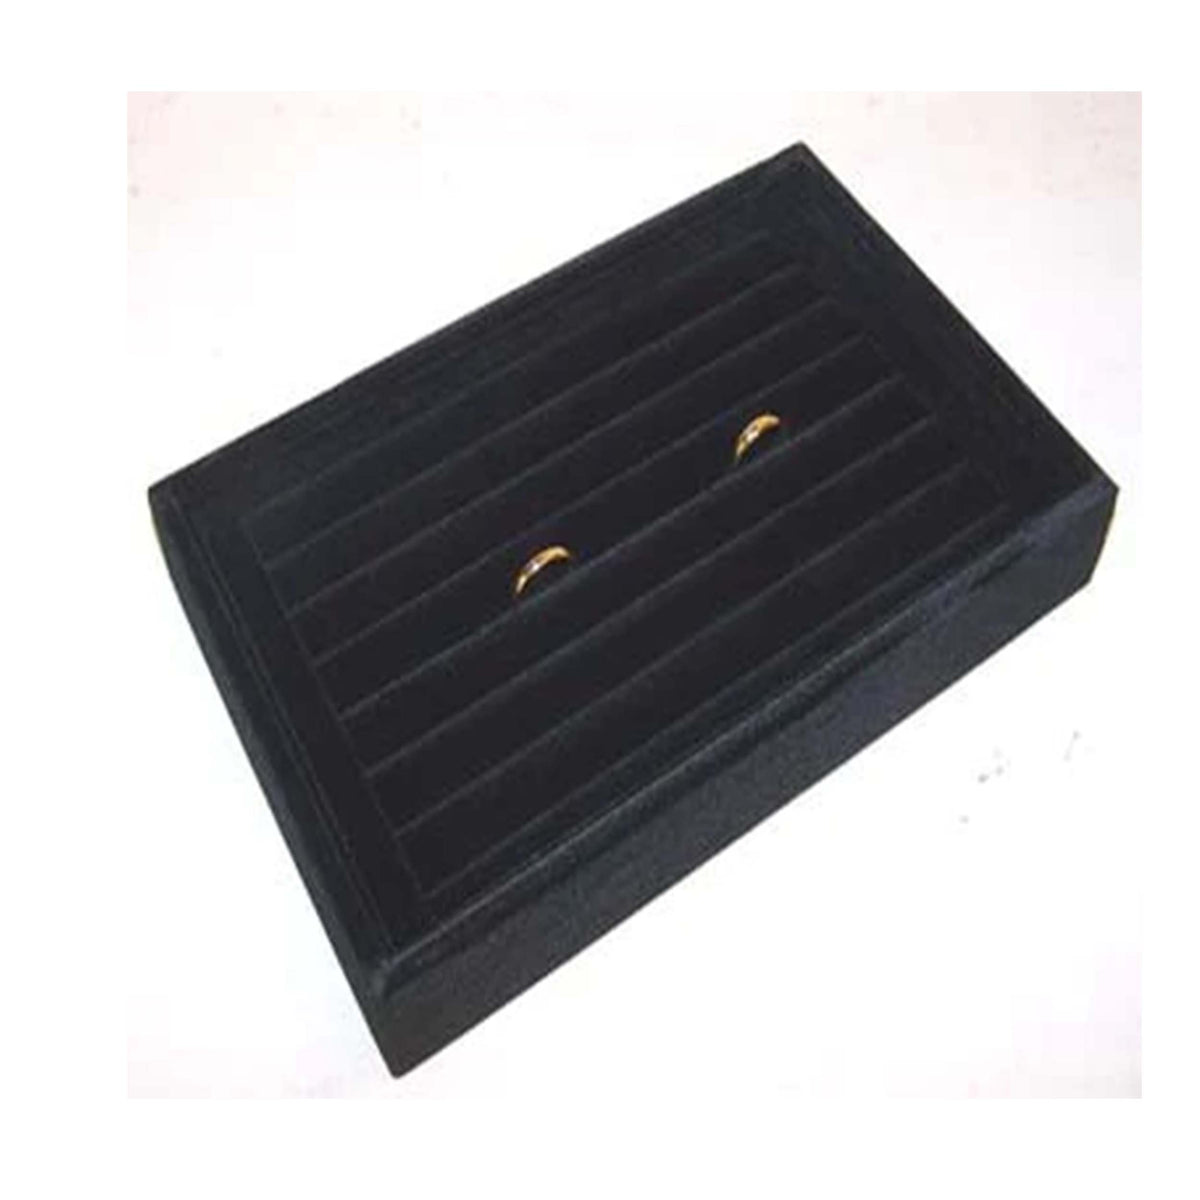 Wholesale Black Small Ring Display Tray Sleek and Versatile Jewelry Organizer (Sold by the piece)